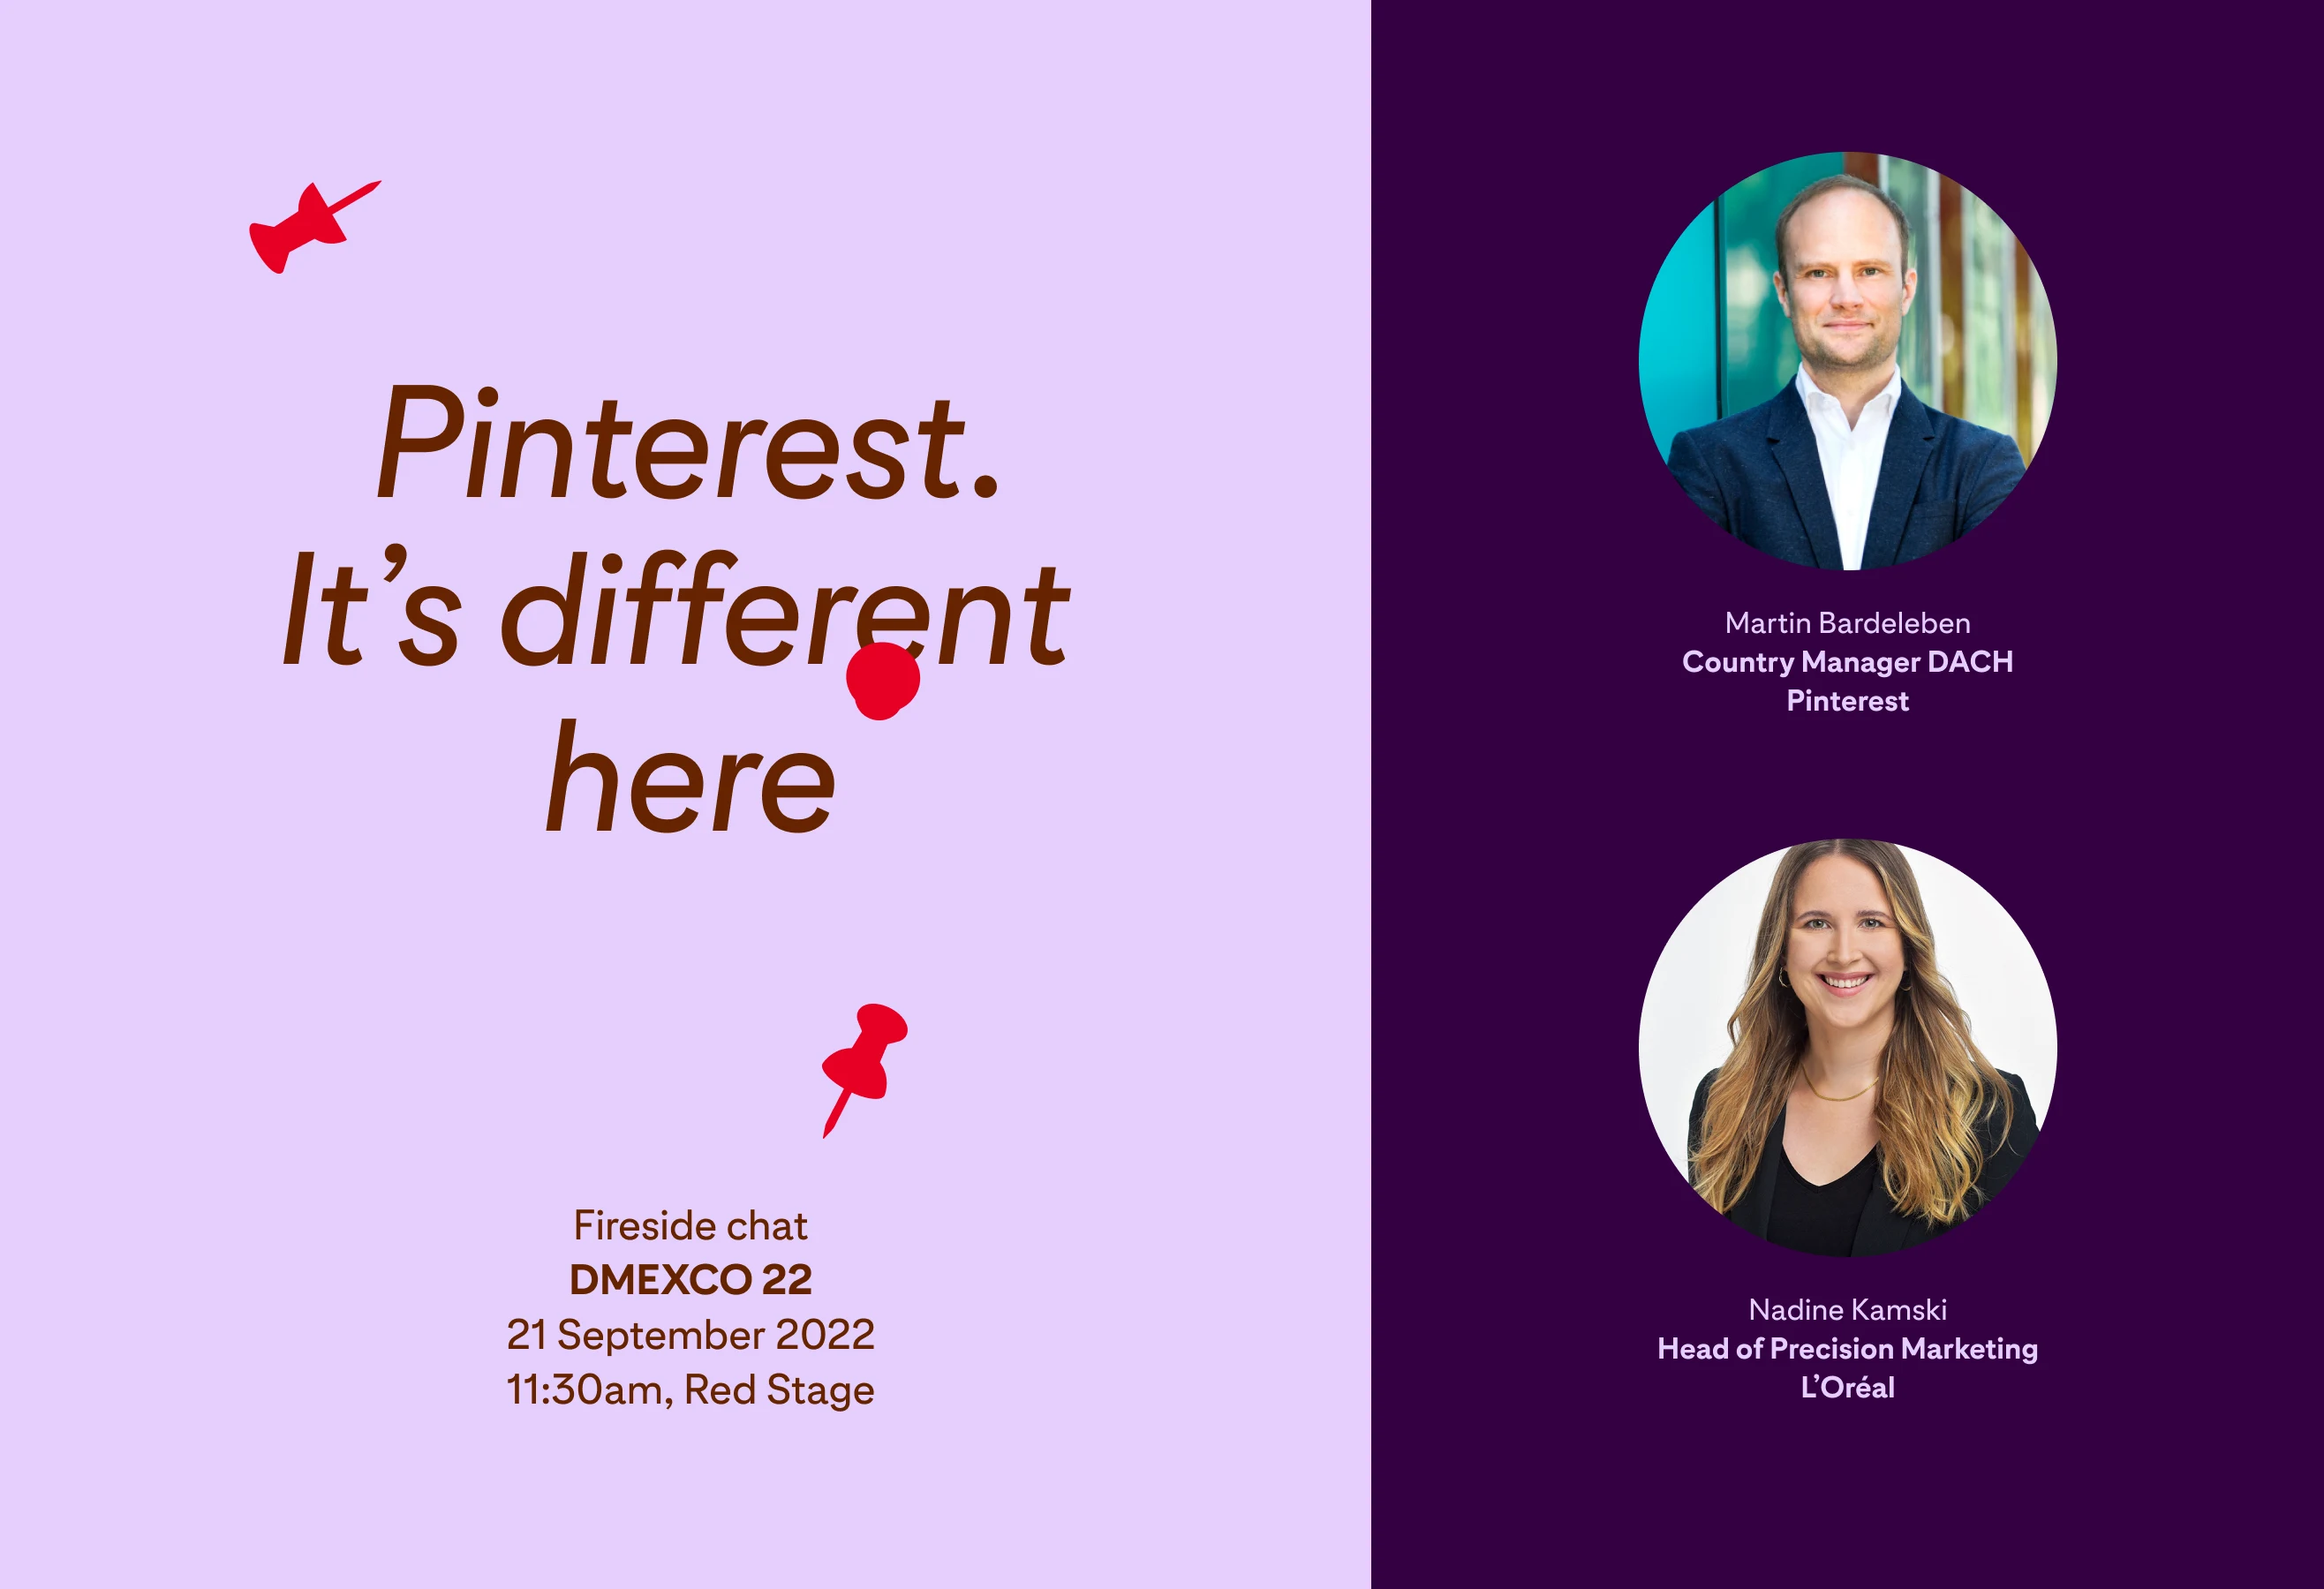 Image advertising the Pinterest at DMEXCO 2022 conference, titled "It's different here with Martin Bardeleben and Nadine Kamski from L'Oréal"